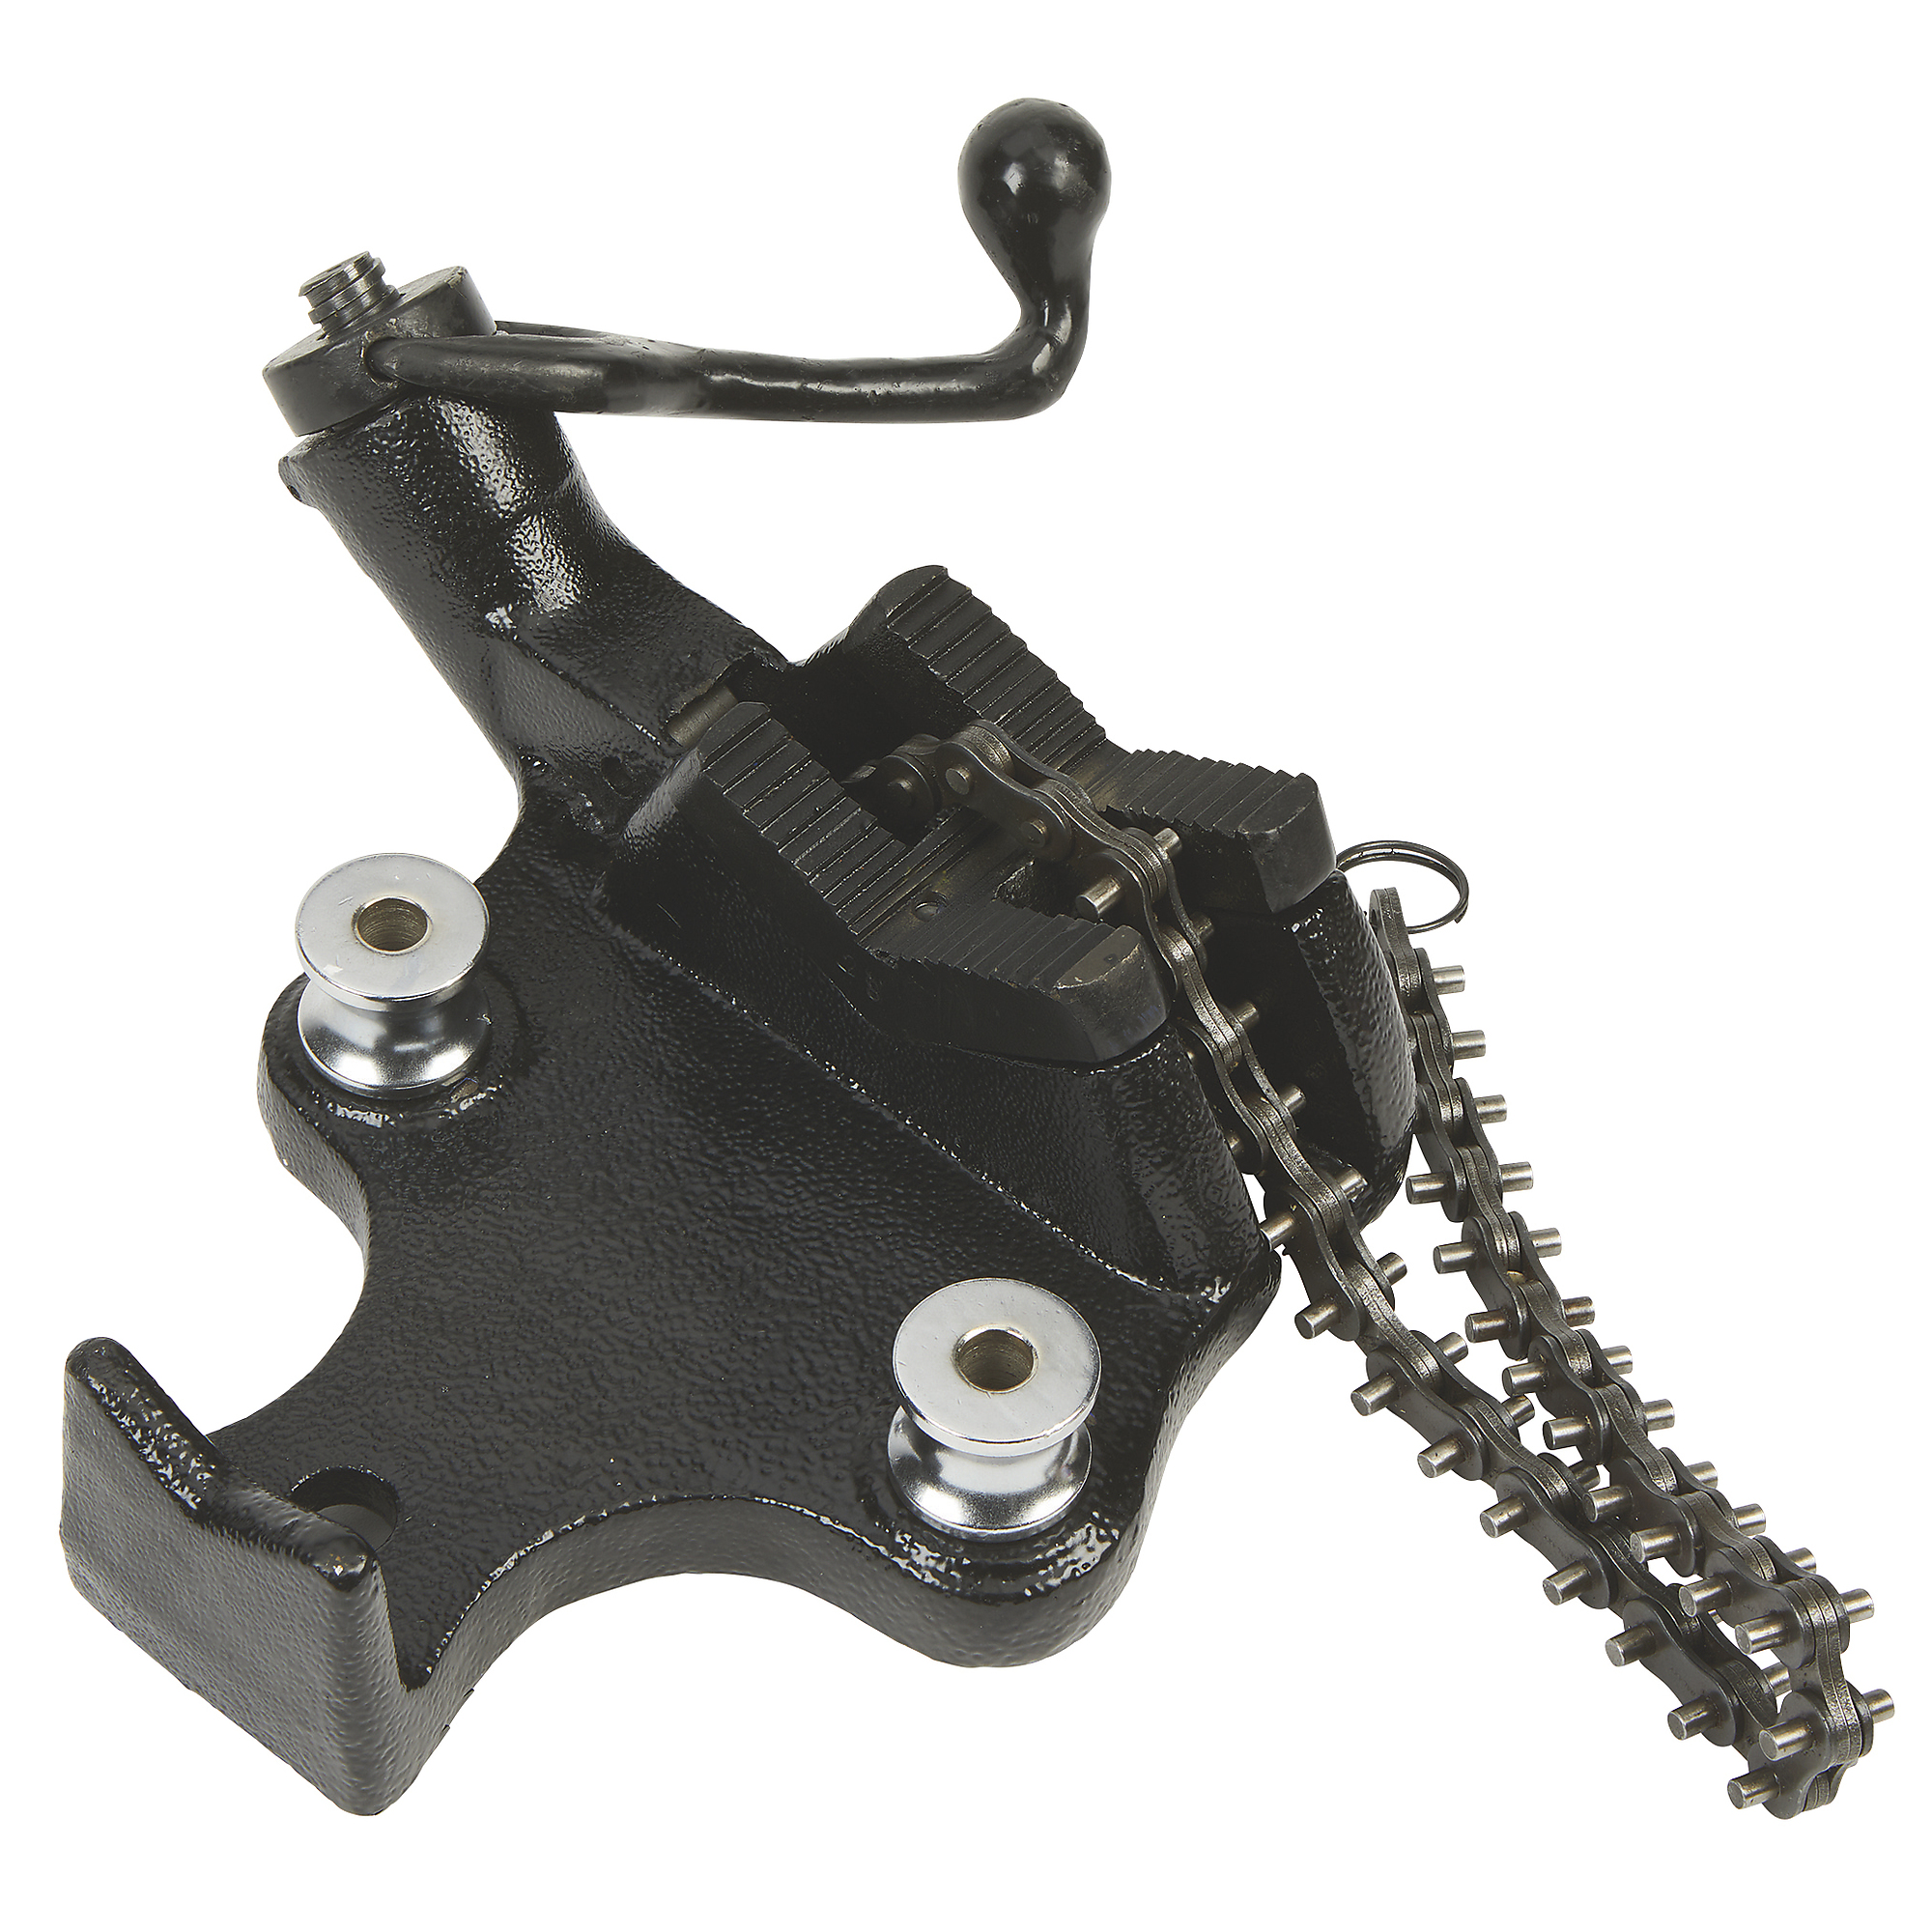 Klutch Pipe Chain Clamp Vise, 3Inch Jaw Width, Model AT-PCV-03